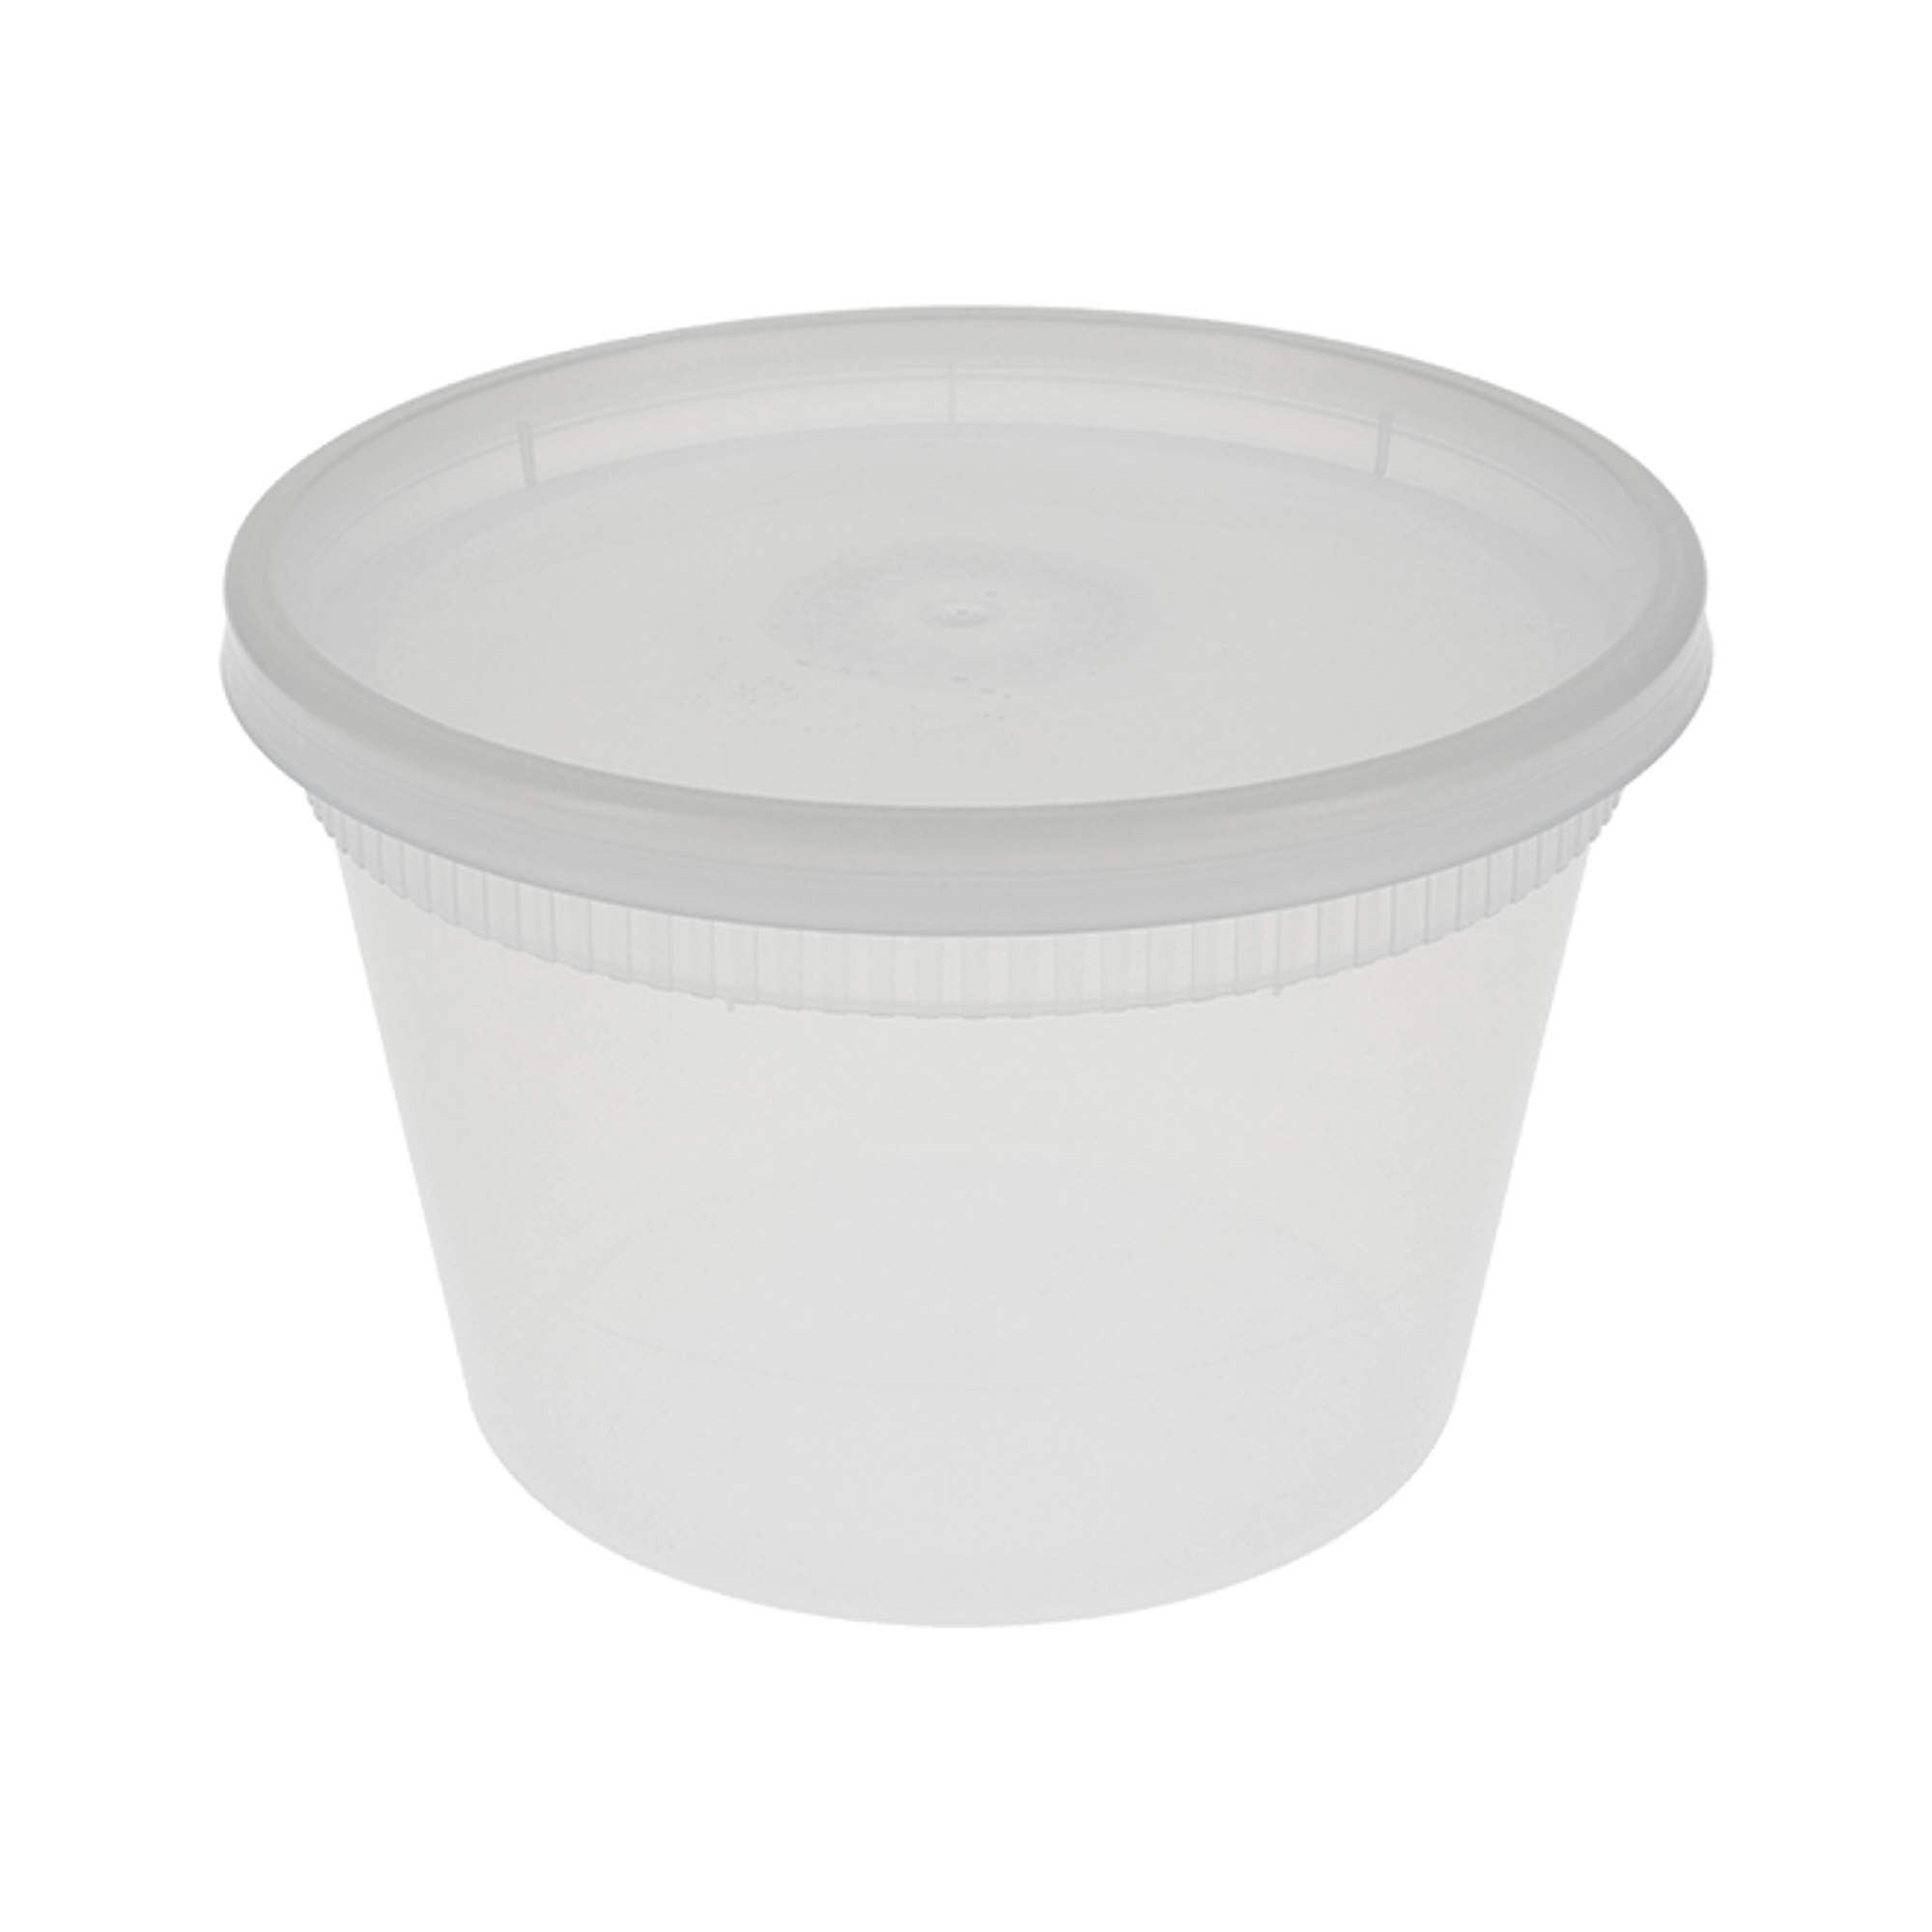 Deli Containers - The BOTTLEBOX® - Recyclable & sustainable containers